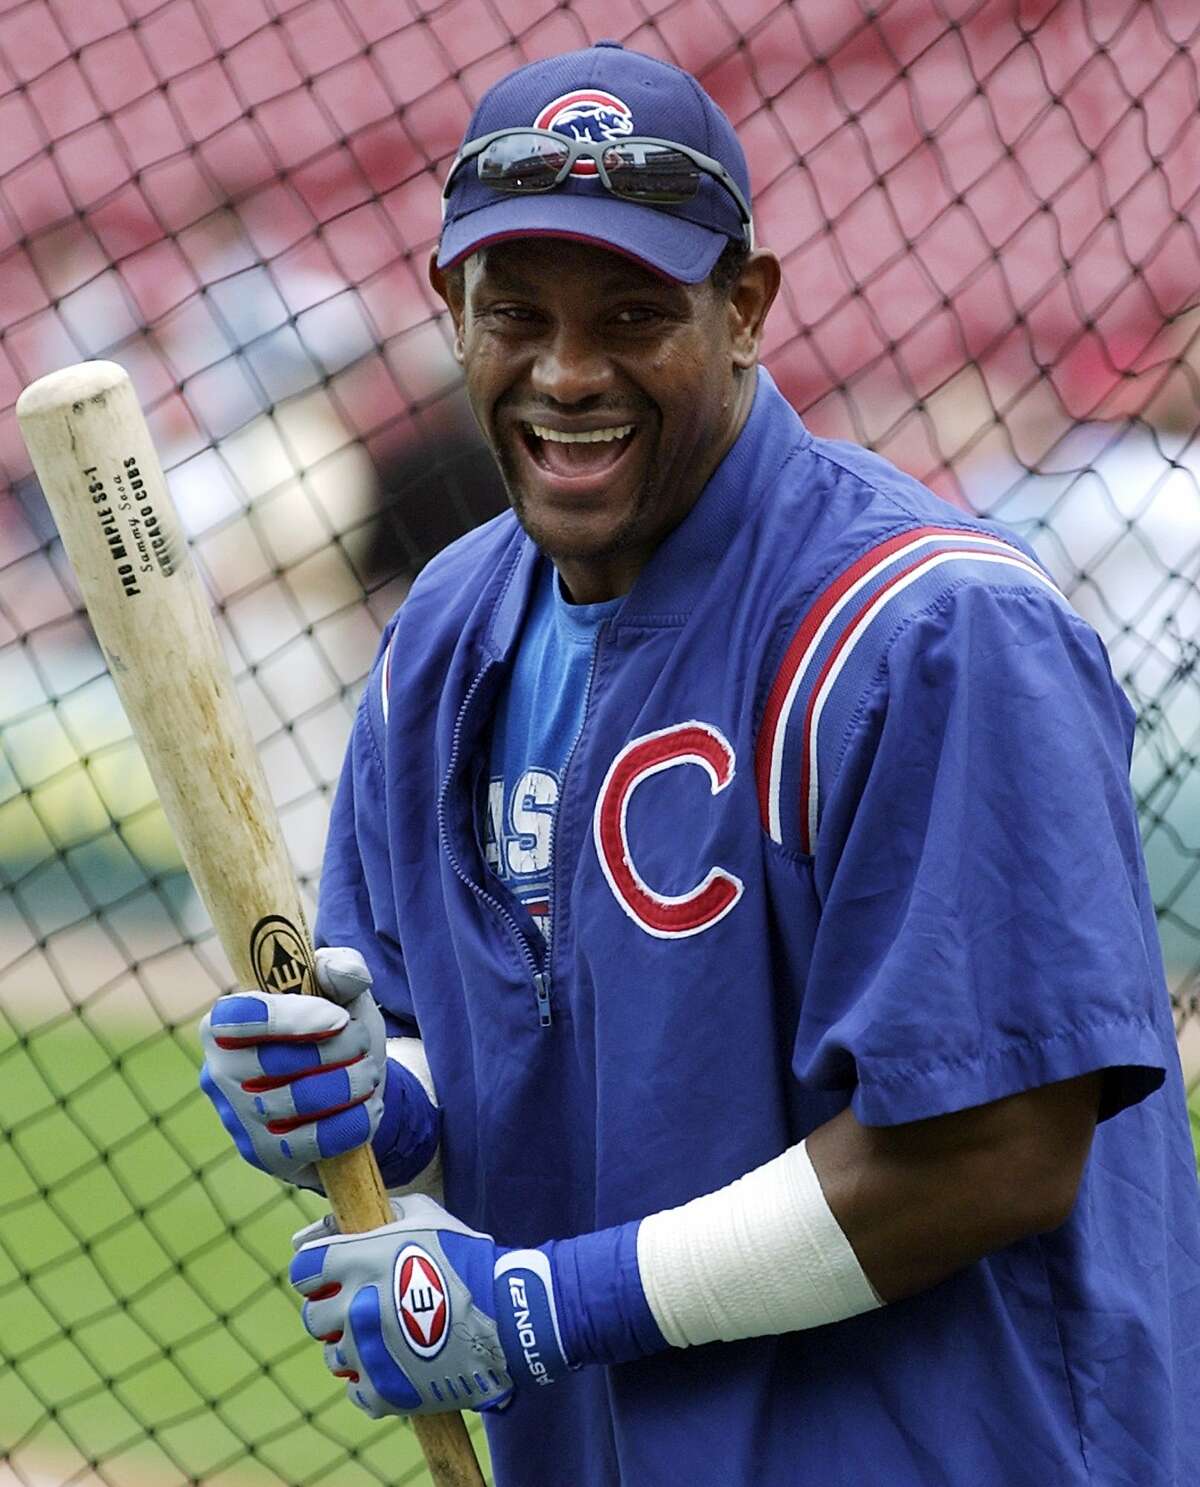 In this June 18, 2003 file photo, Chicago Cubs' Sammy Sosa smiles during batting practice prior to a baseball game with the Cincinnati Reds in Cincinnati. The New York Times reported on its website Tuesday, June 16, 2009, that Sosa tested positive for a performance-enhancing drug in 2003, citing lawyers familiar with the case. The newspaper did not identify the drug. (AP Photo/Al Behrman, File)